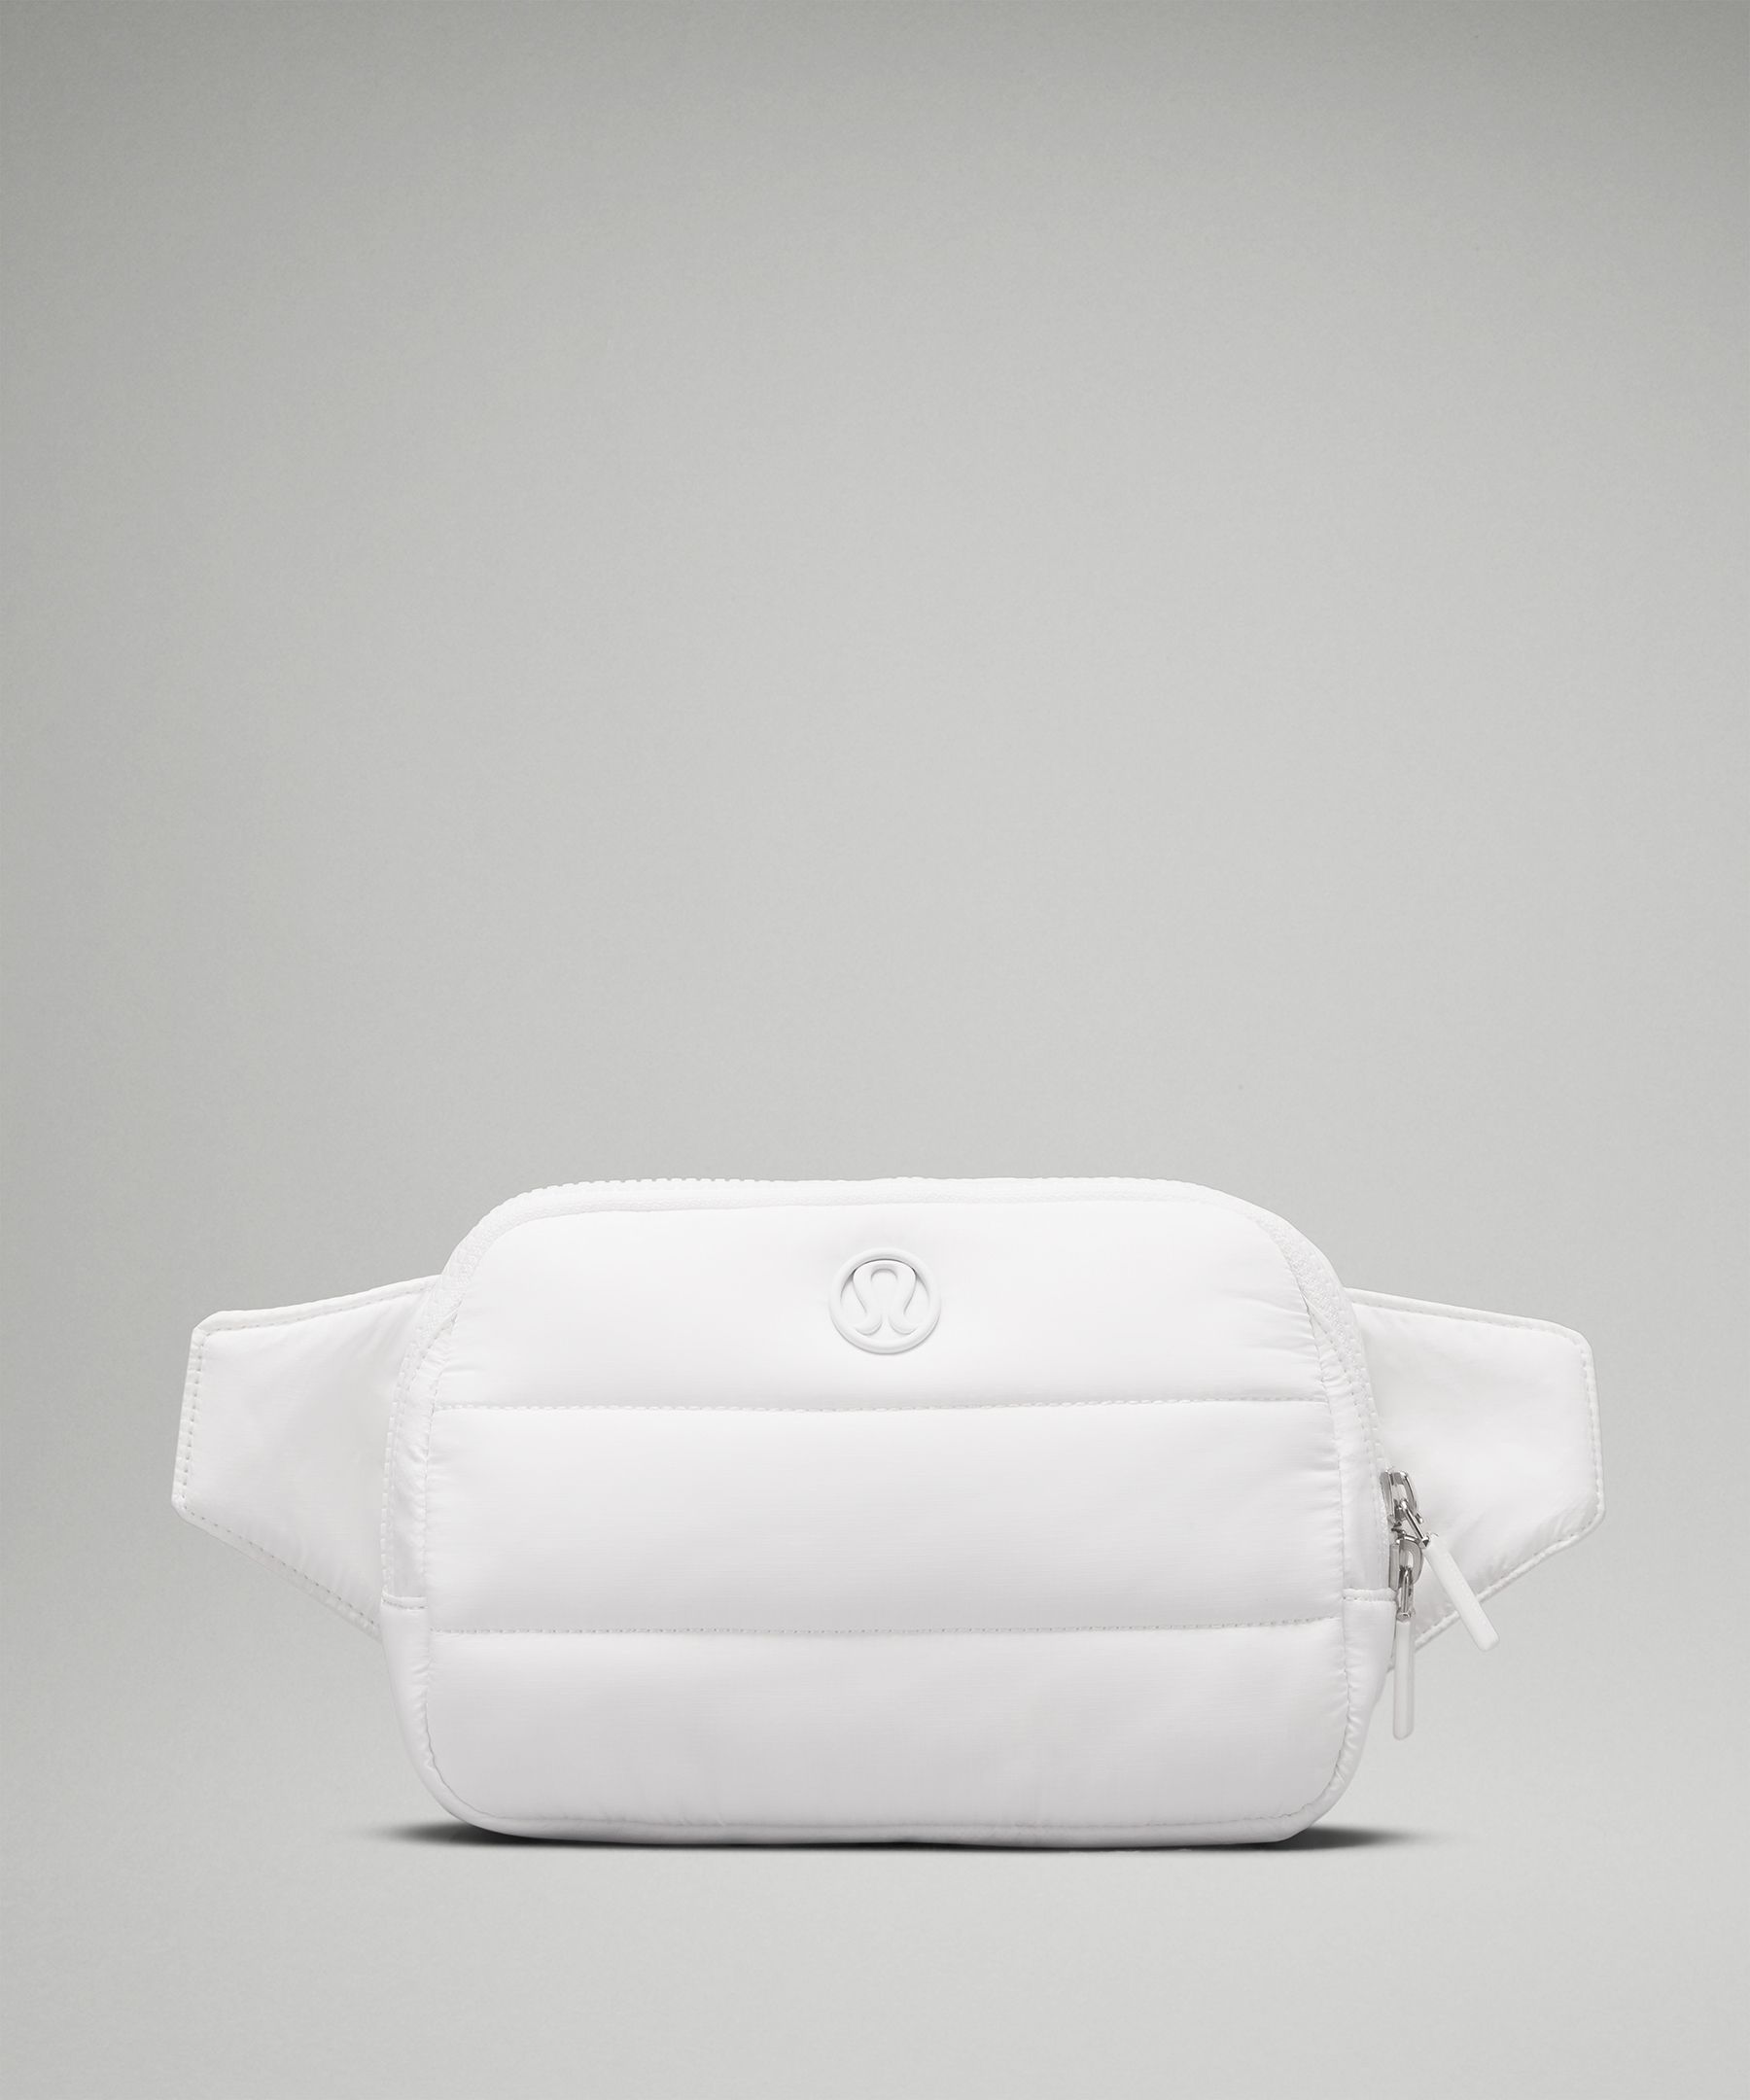 Final Sale on lululemon Bags & Other Accessories ~ As low as $19, with FREE  Shipping